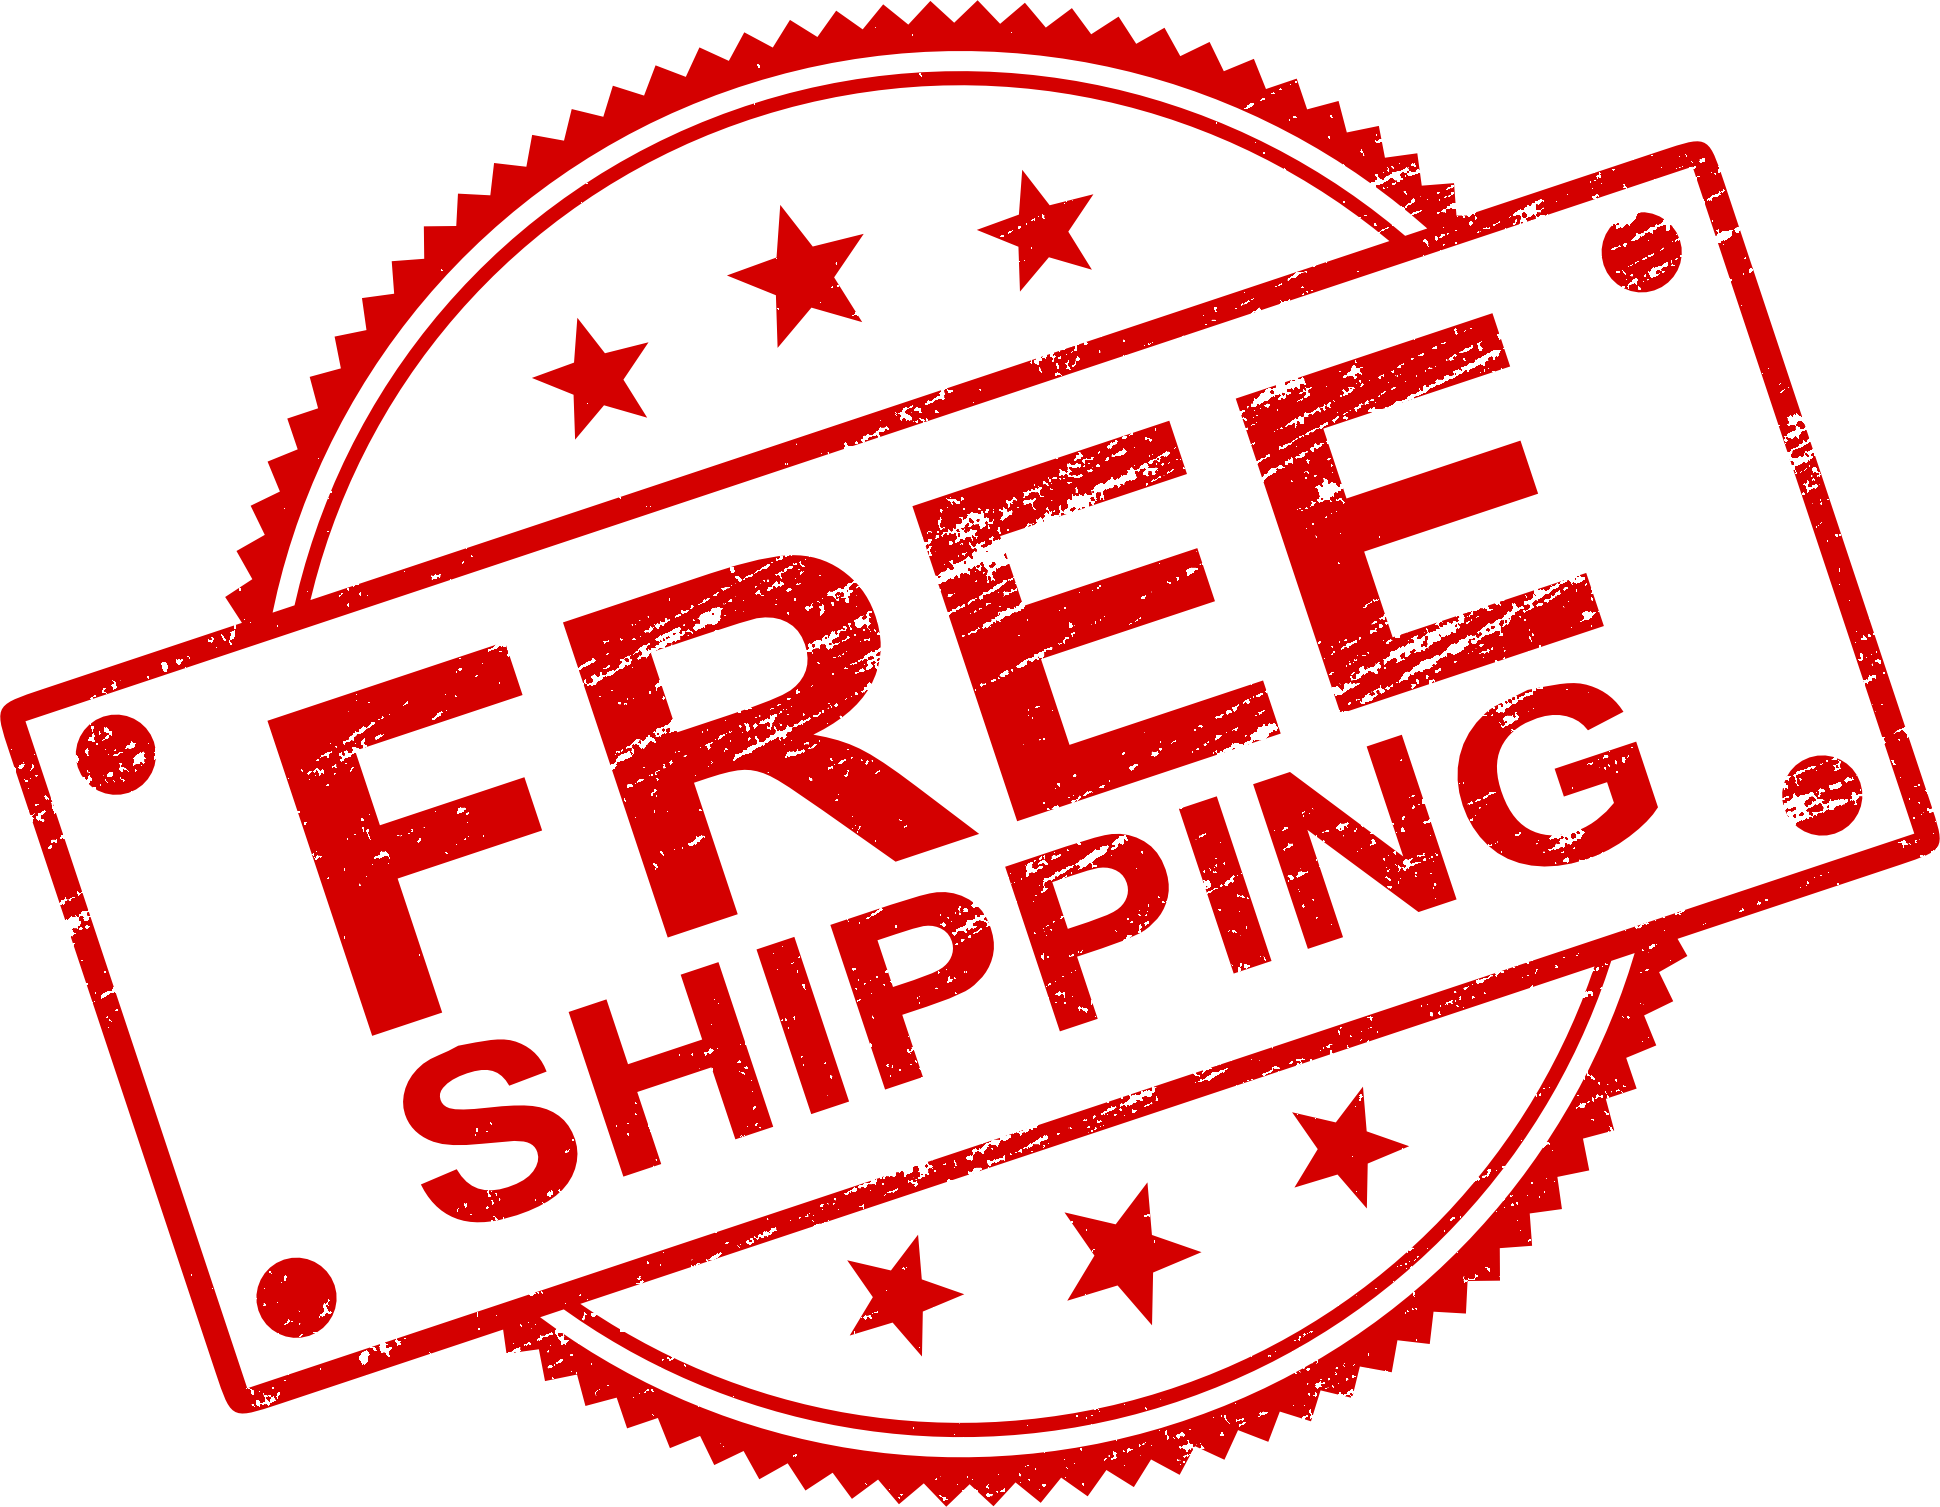 Free-Shipping-Download-PNG